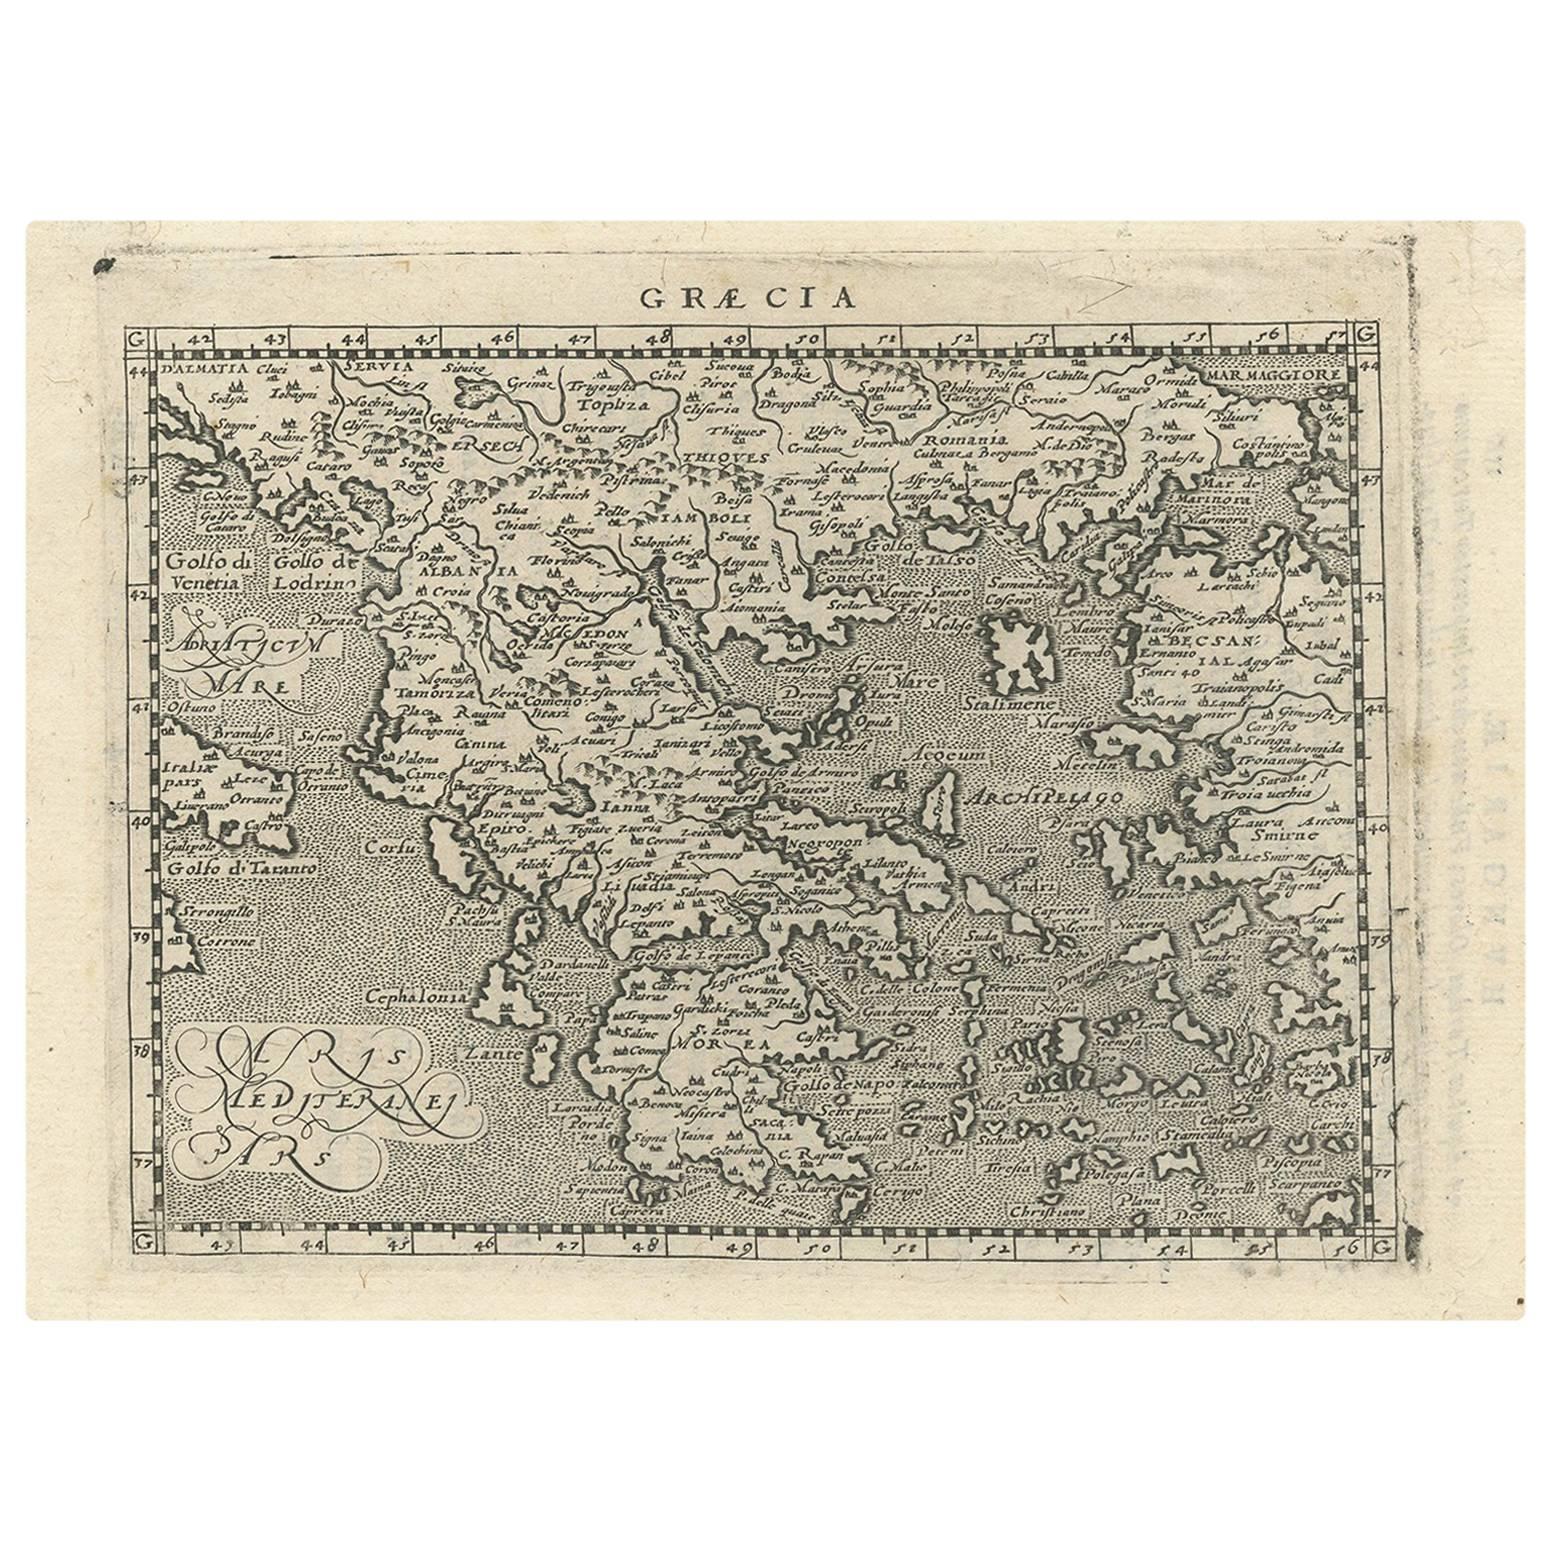 Antique Map of Greece by G. Magini, 1597